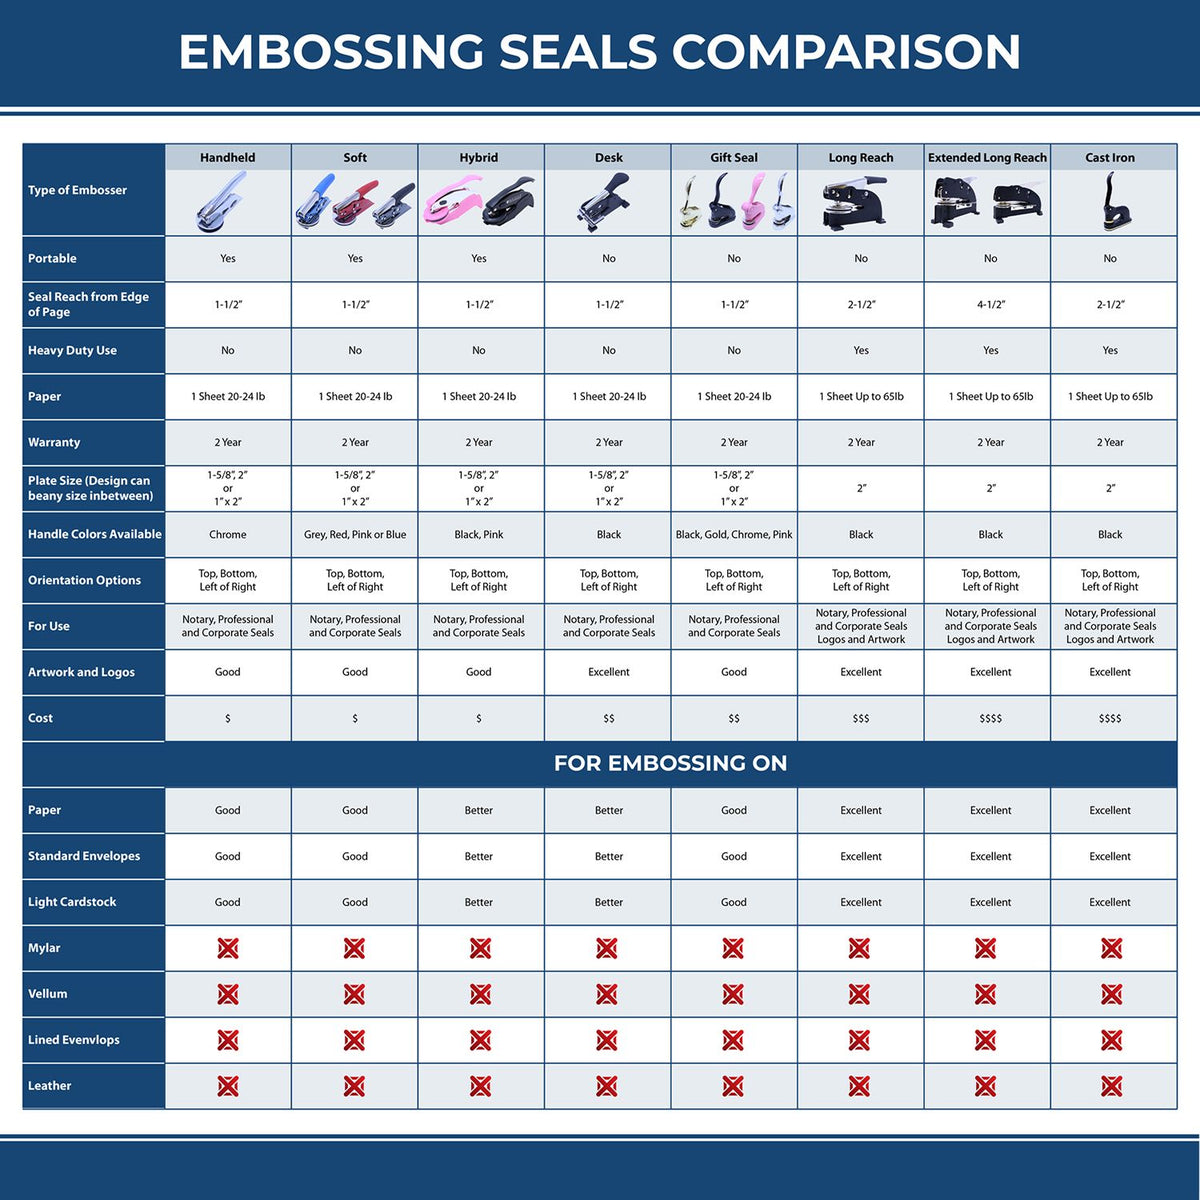 A comparison chart for the different types of mount models available for the Extended Long Reach Oklahoma Architect Seal Embosser.